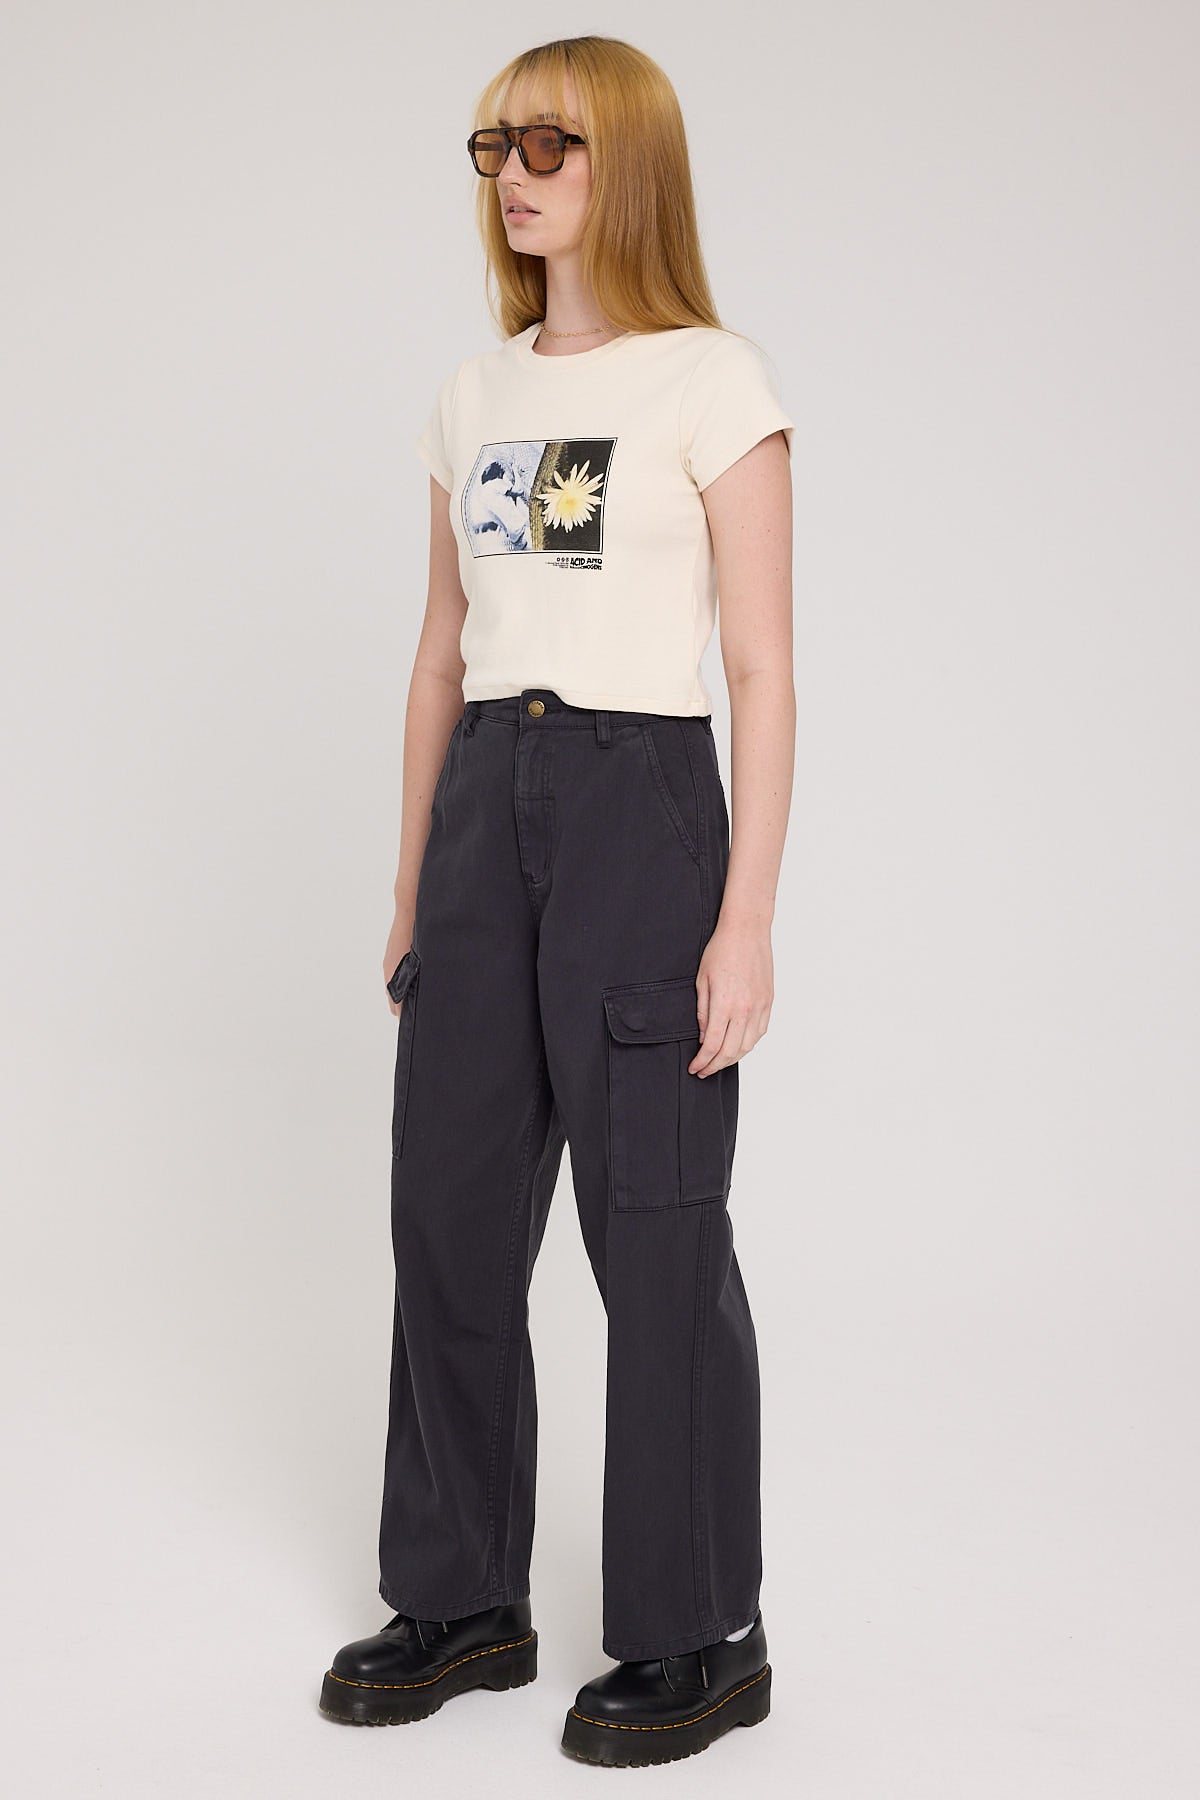 Thrills Union Baggy Pant Charcoal